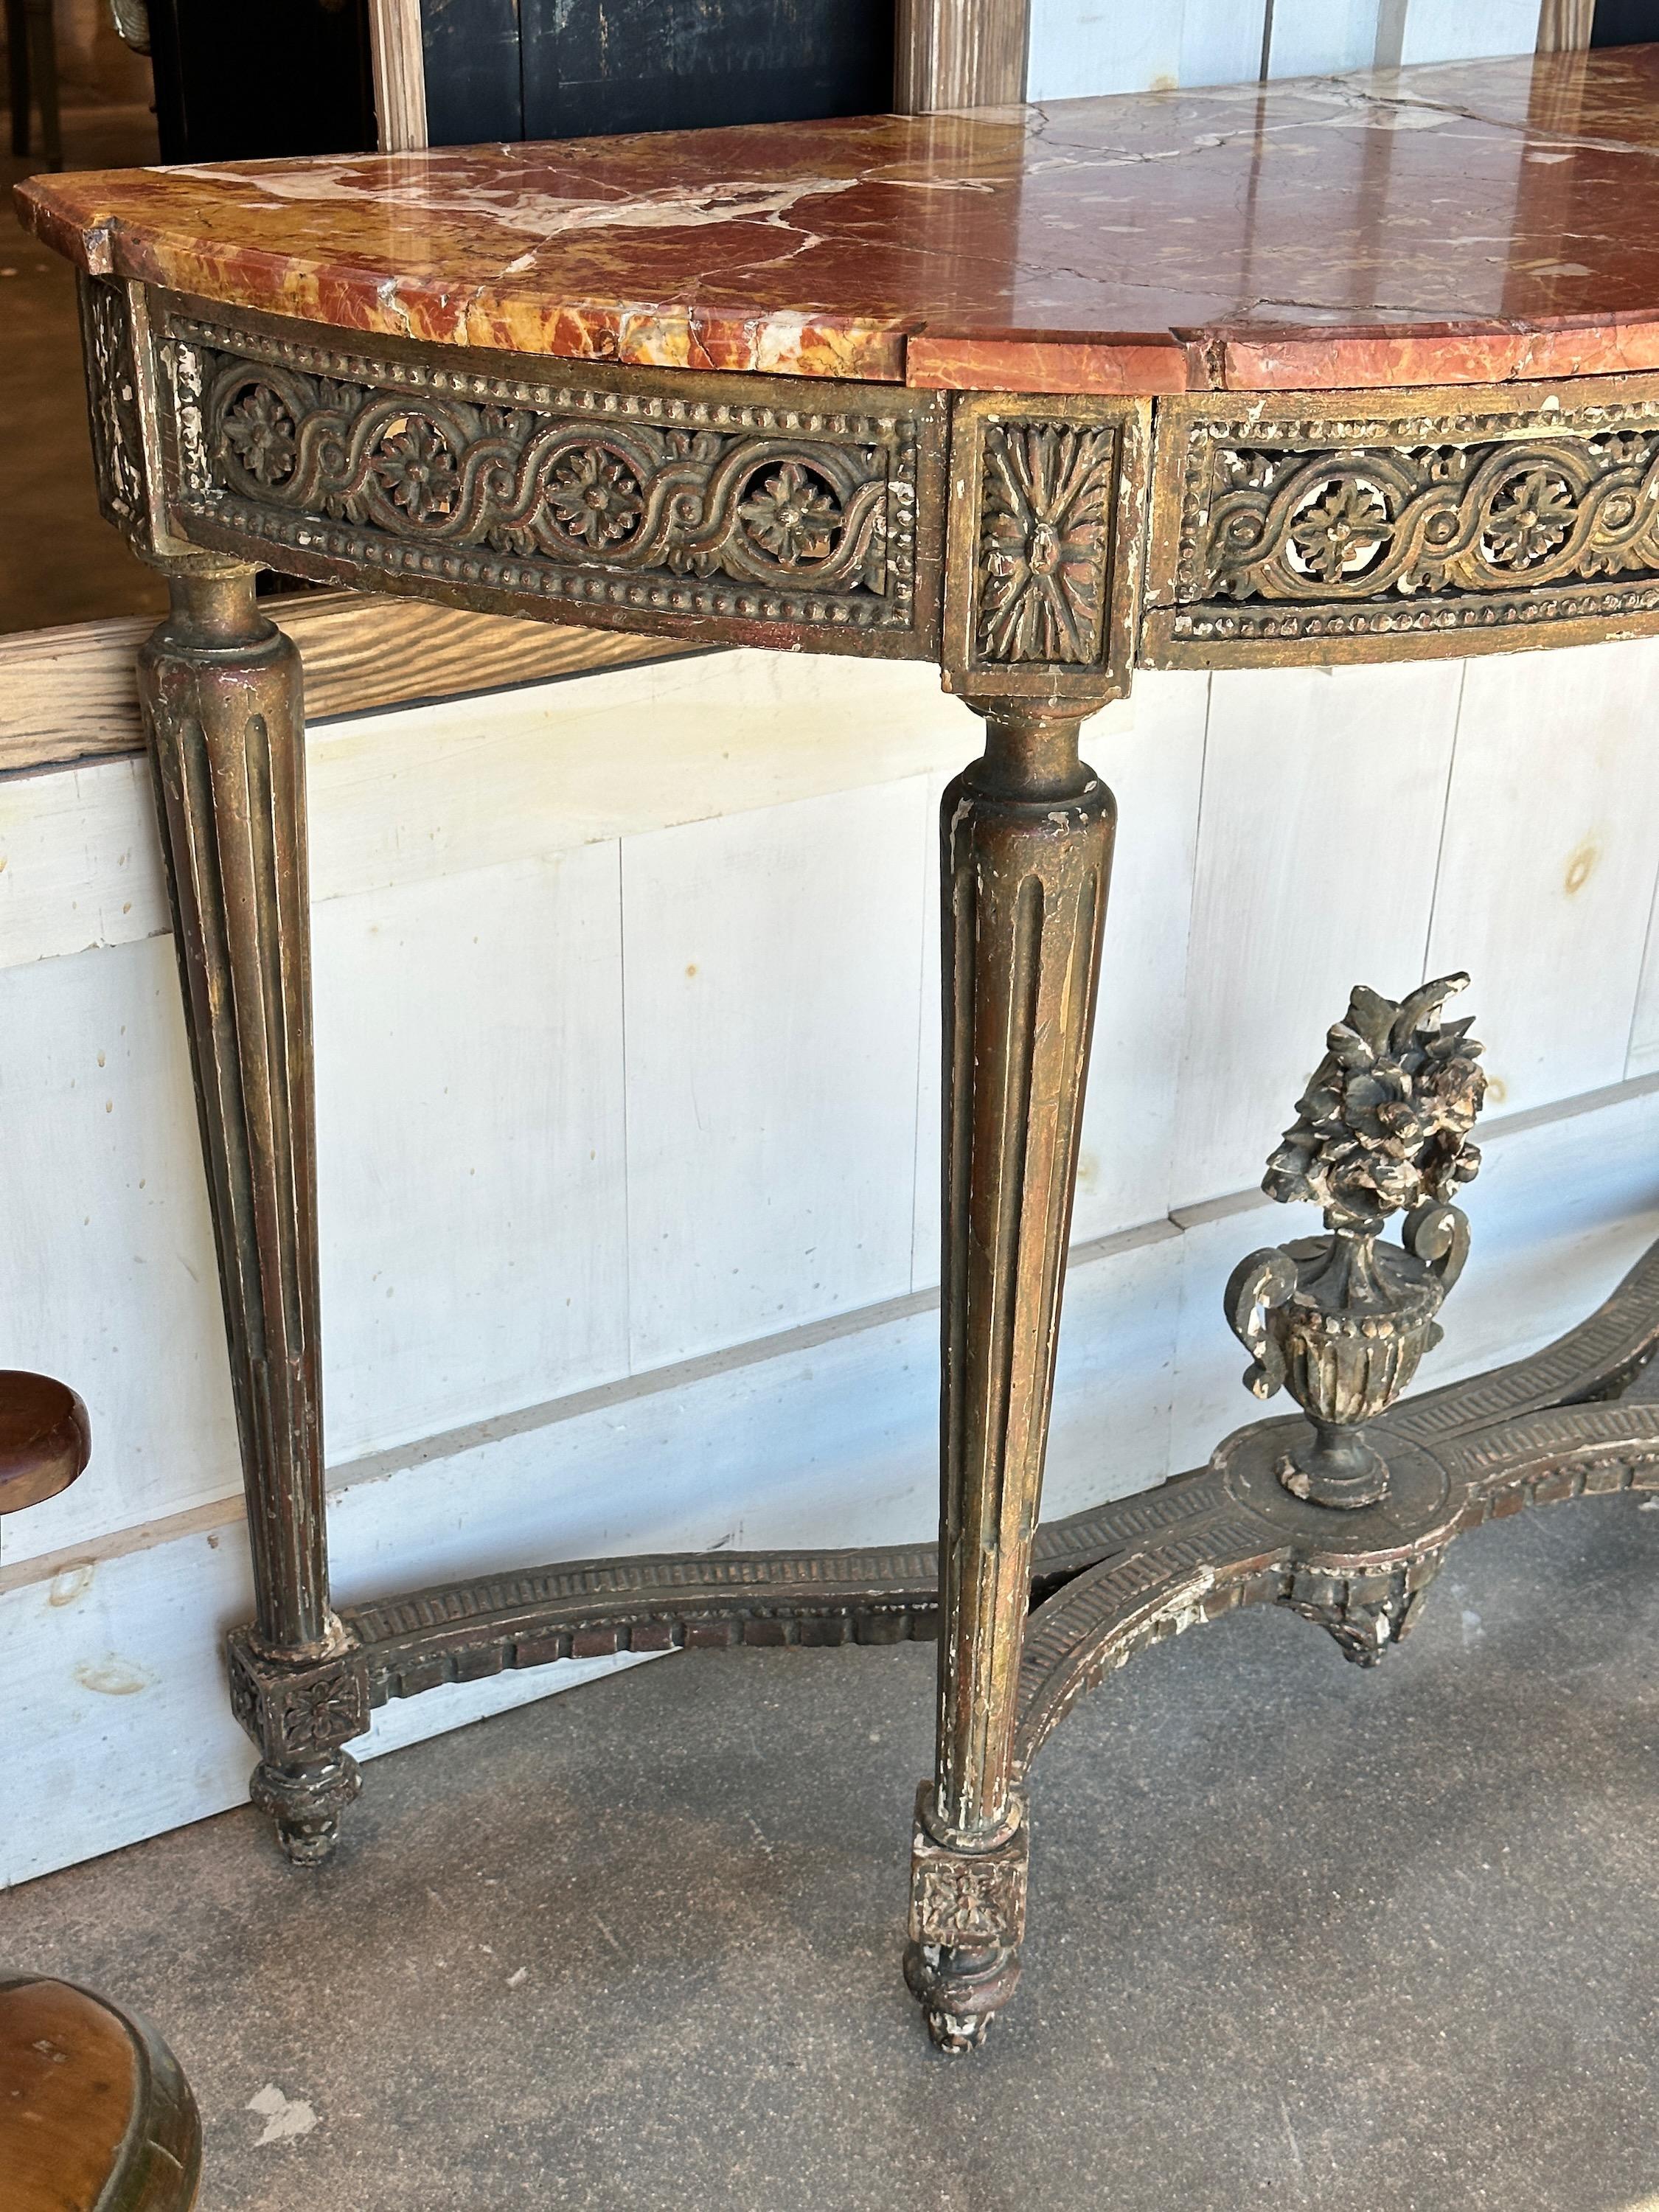 Incredible console. Really makes a statement. Great paint, marble has some repairs but well done.